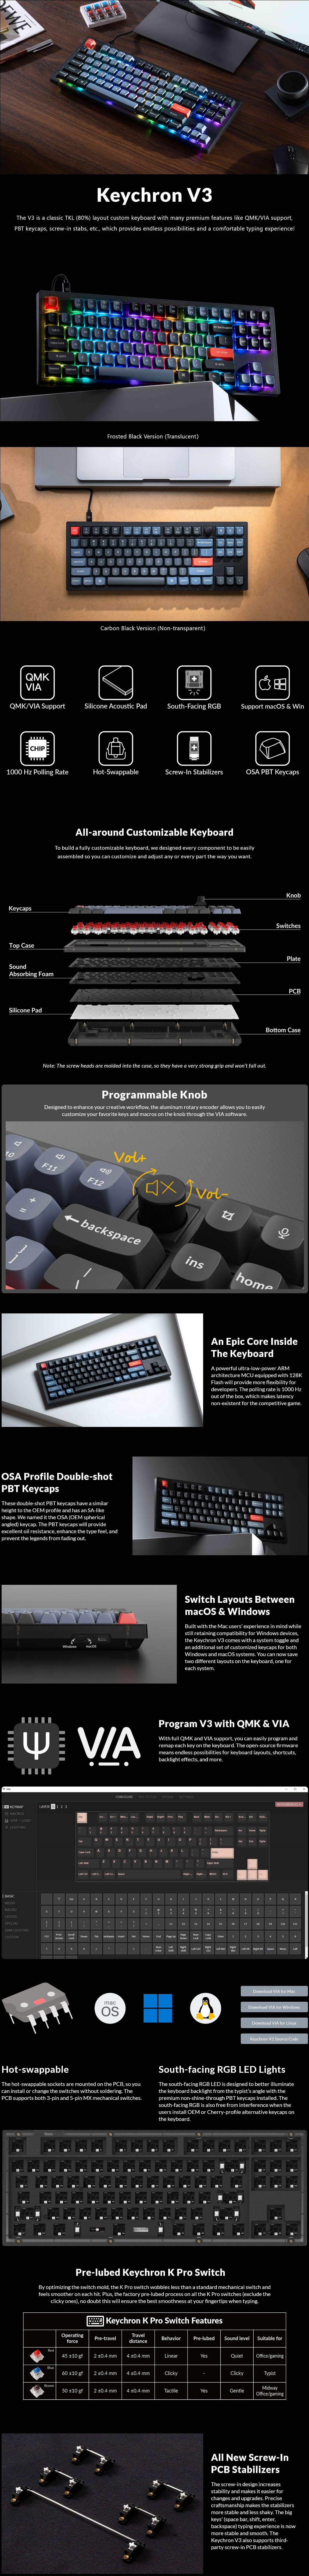 A large marketing image providing additional information about the product Keychron V3 RGB TKL Mechanical Keyboard - Carbon Black (Brown Switch) - Additional alt info not provided